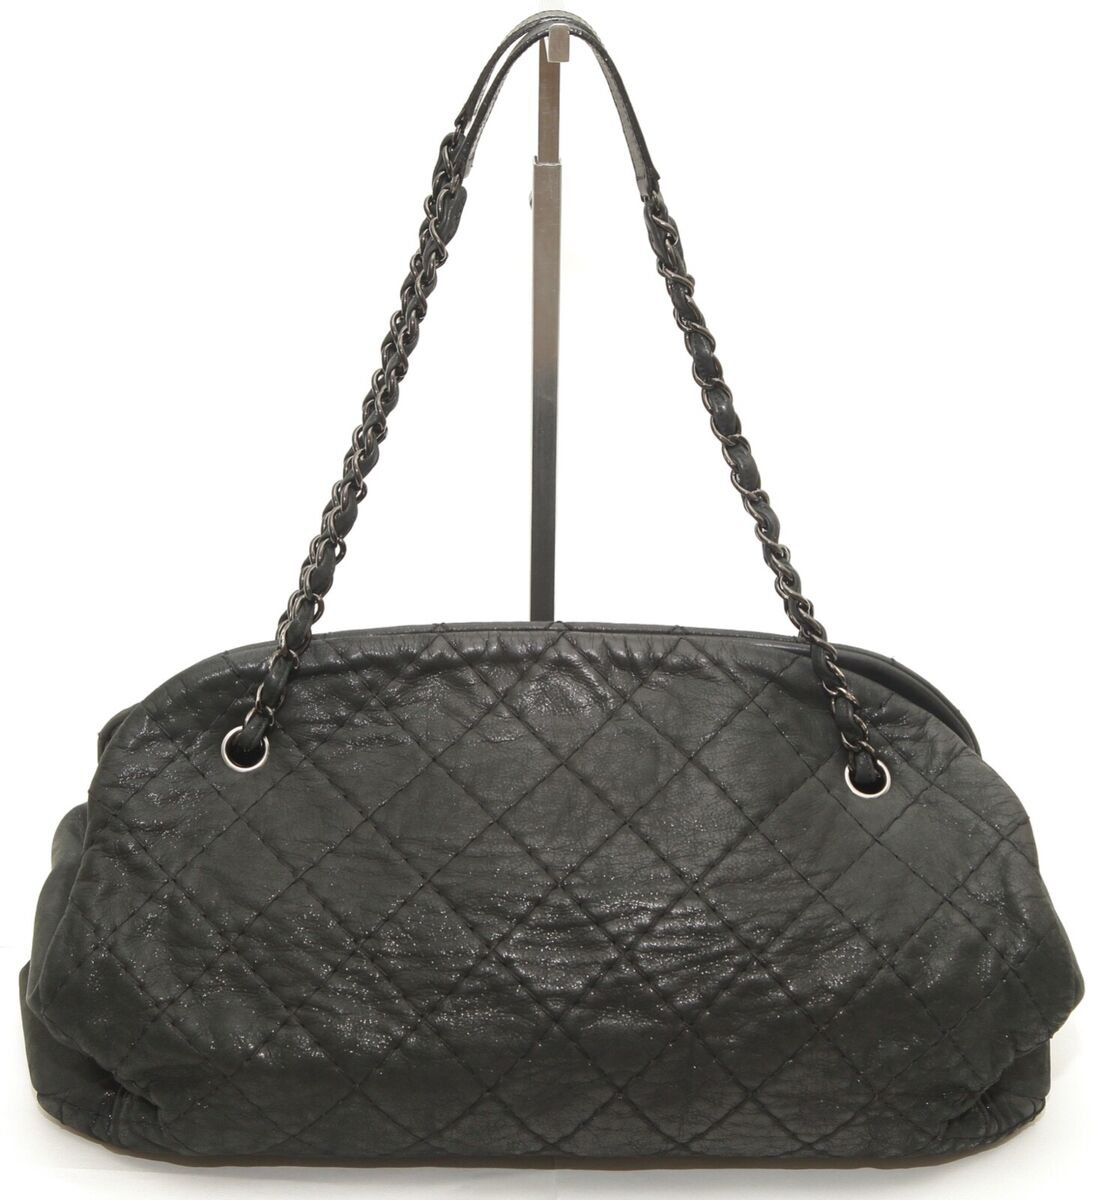 Chanel Chanel Just Mademoiselle Black Quilted Leather Shoulder